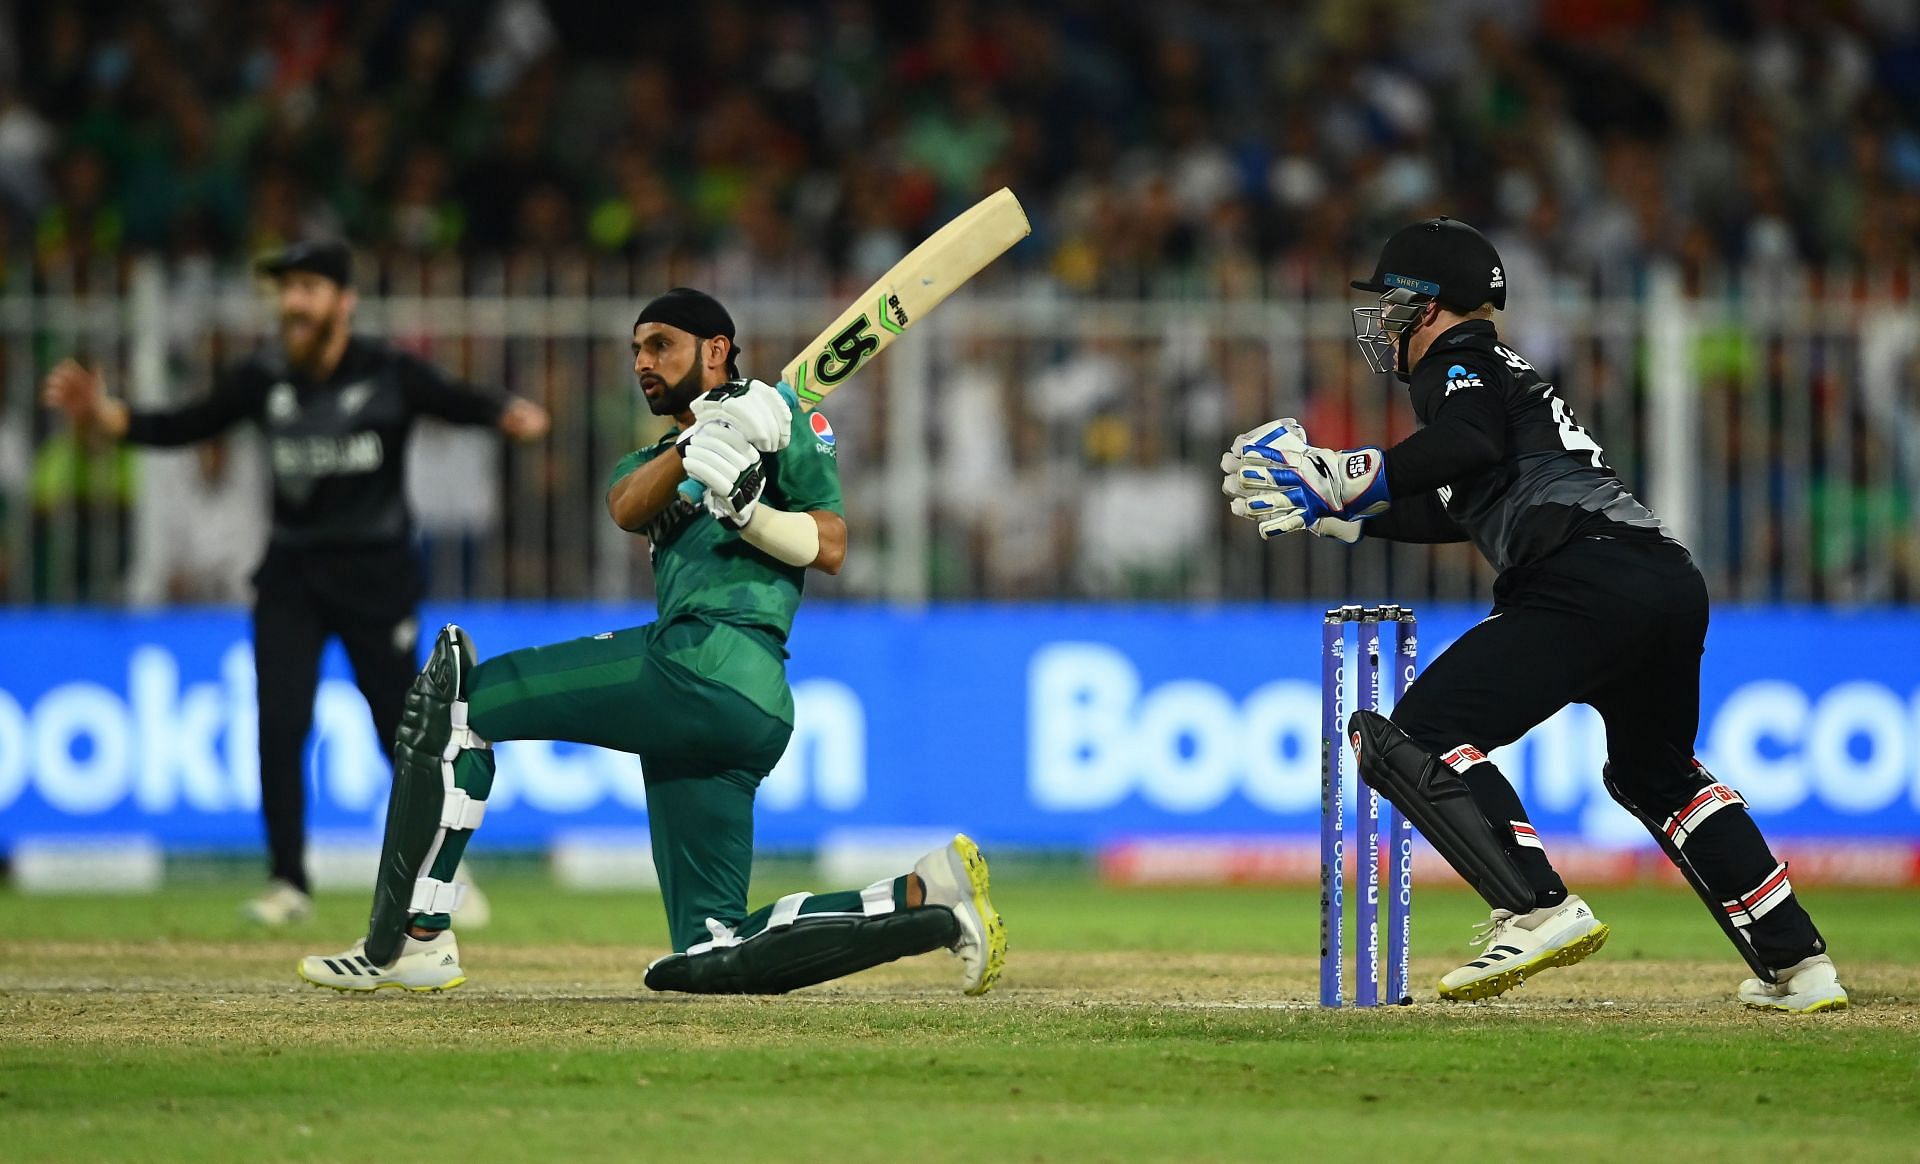 T20 World Cup 2021: &quot;He proved the selectors right today&quot;- Zaheer Khan on Shoaib Malik